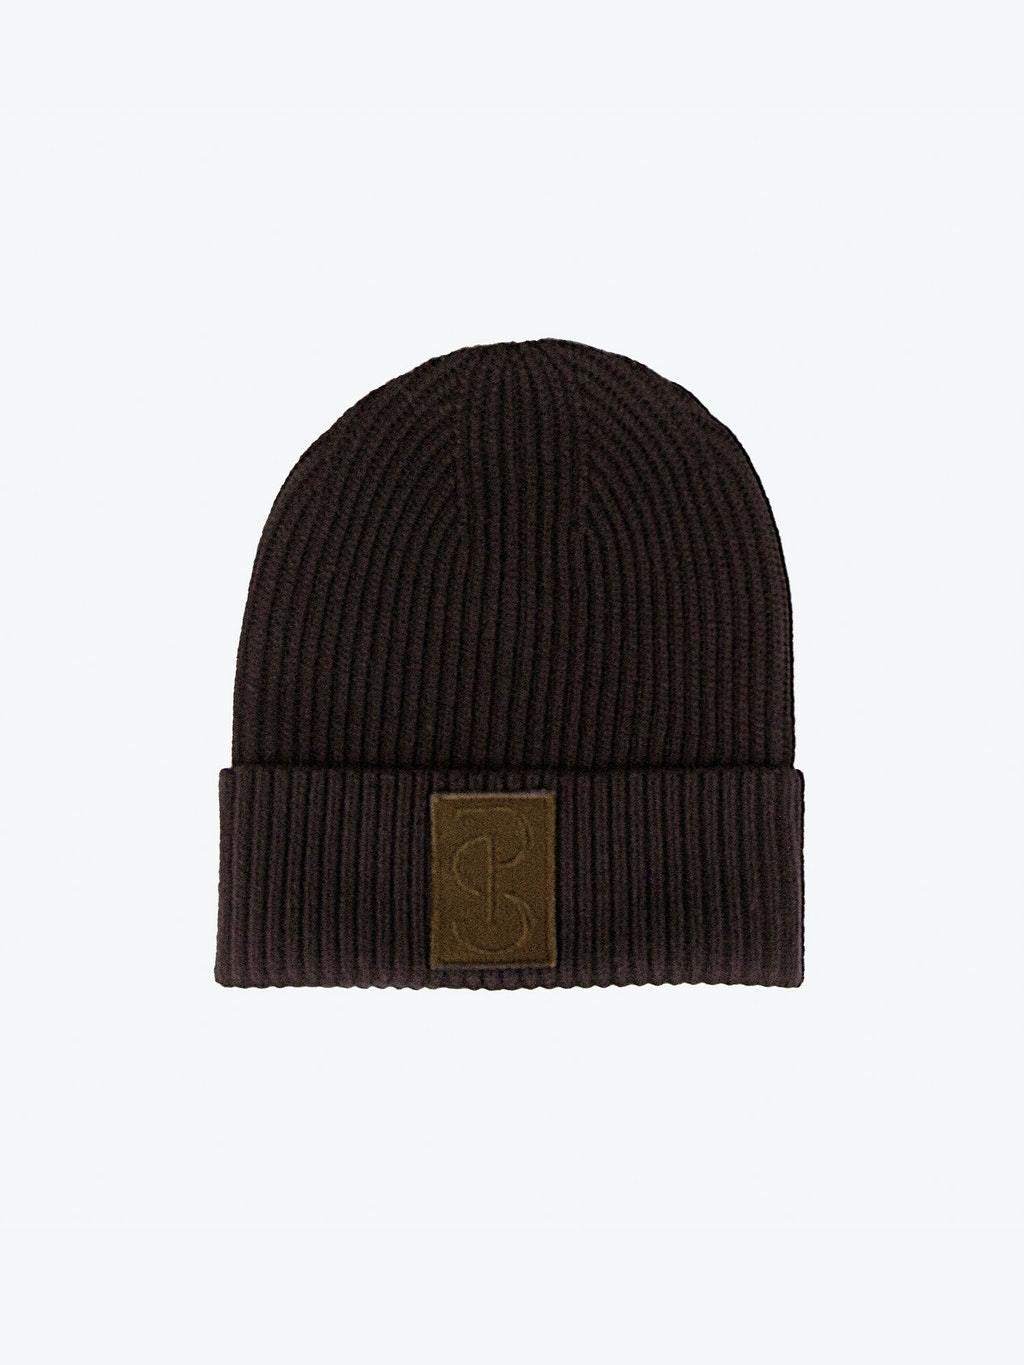 PSOS 'Sally' knitted beanie - Coffee Rider Accessories 